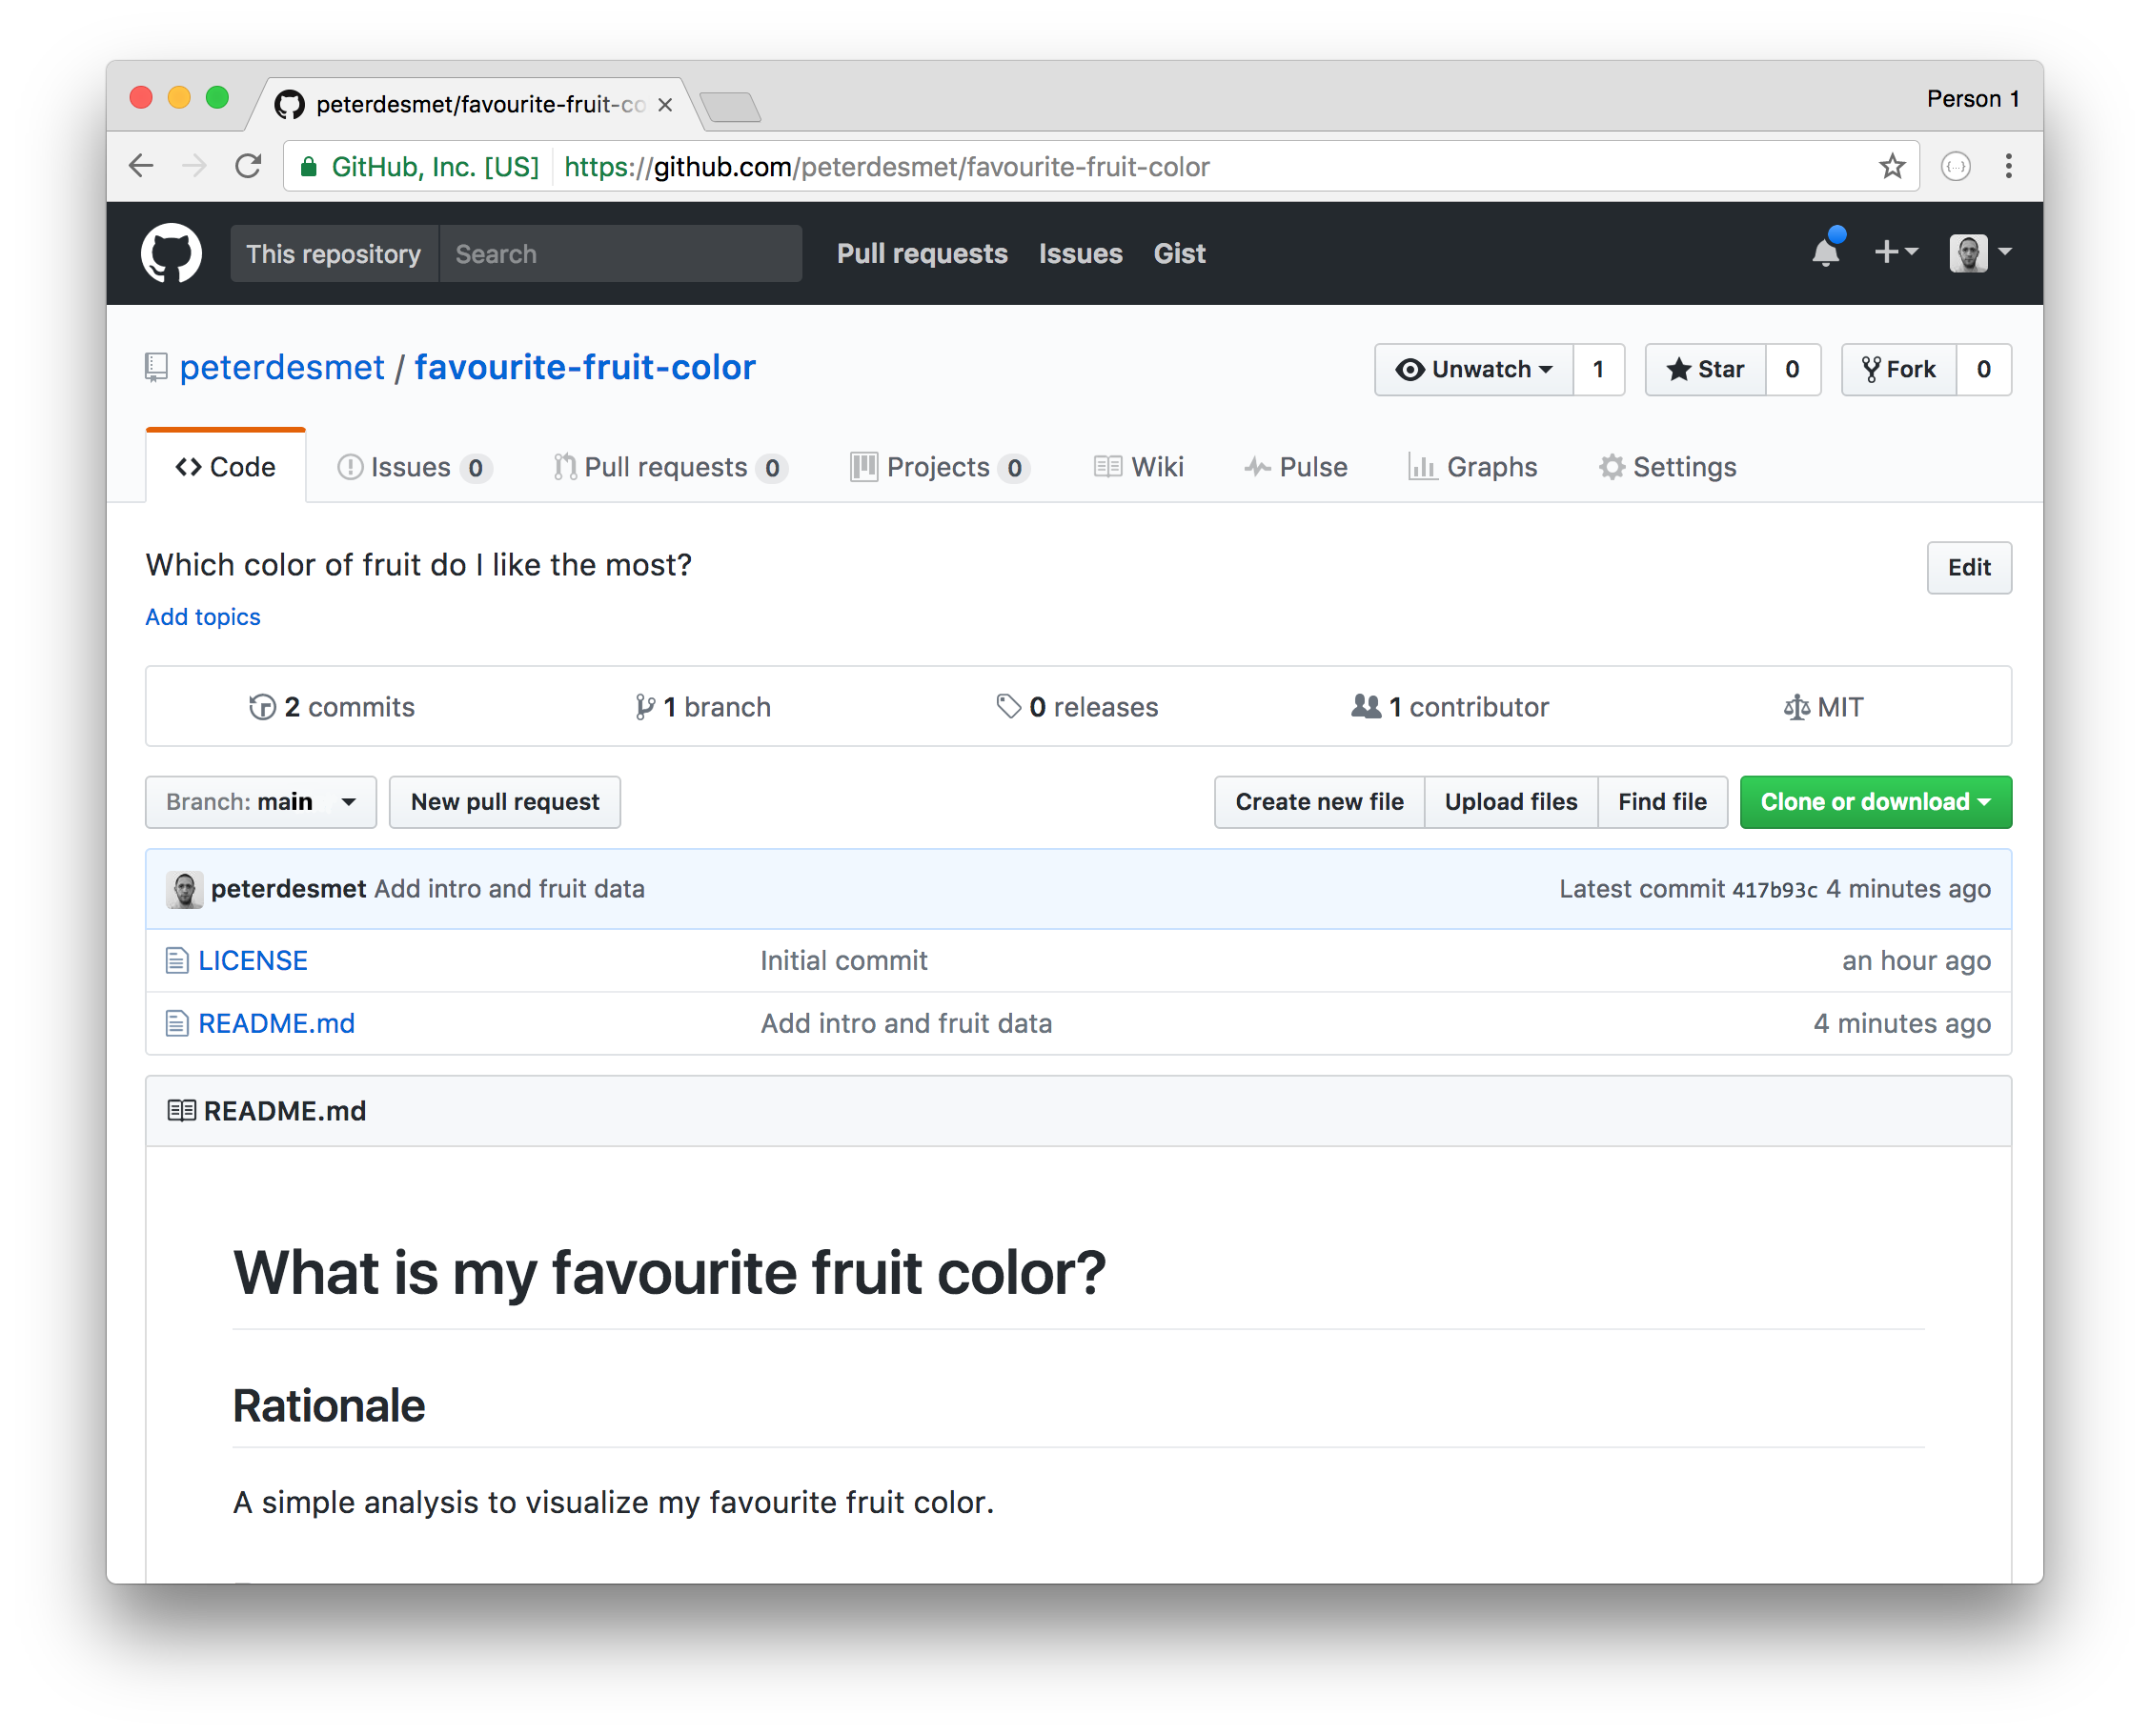 Verify your commits on GitHub